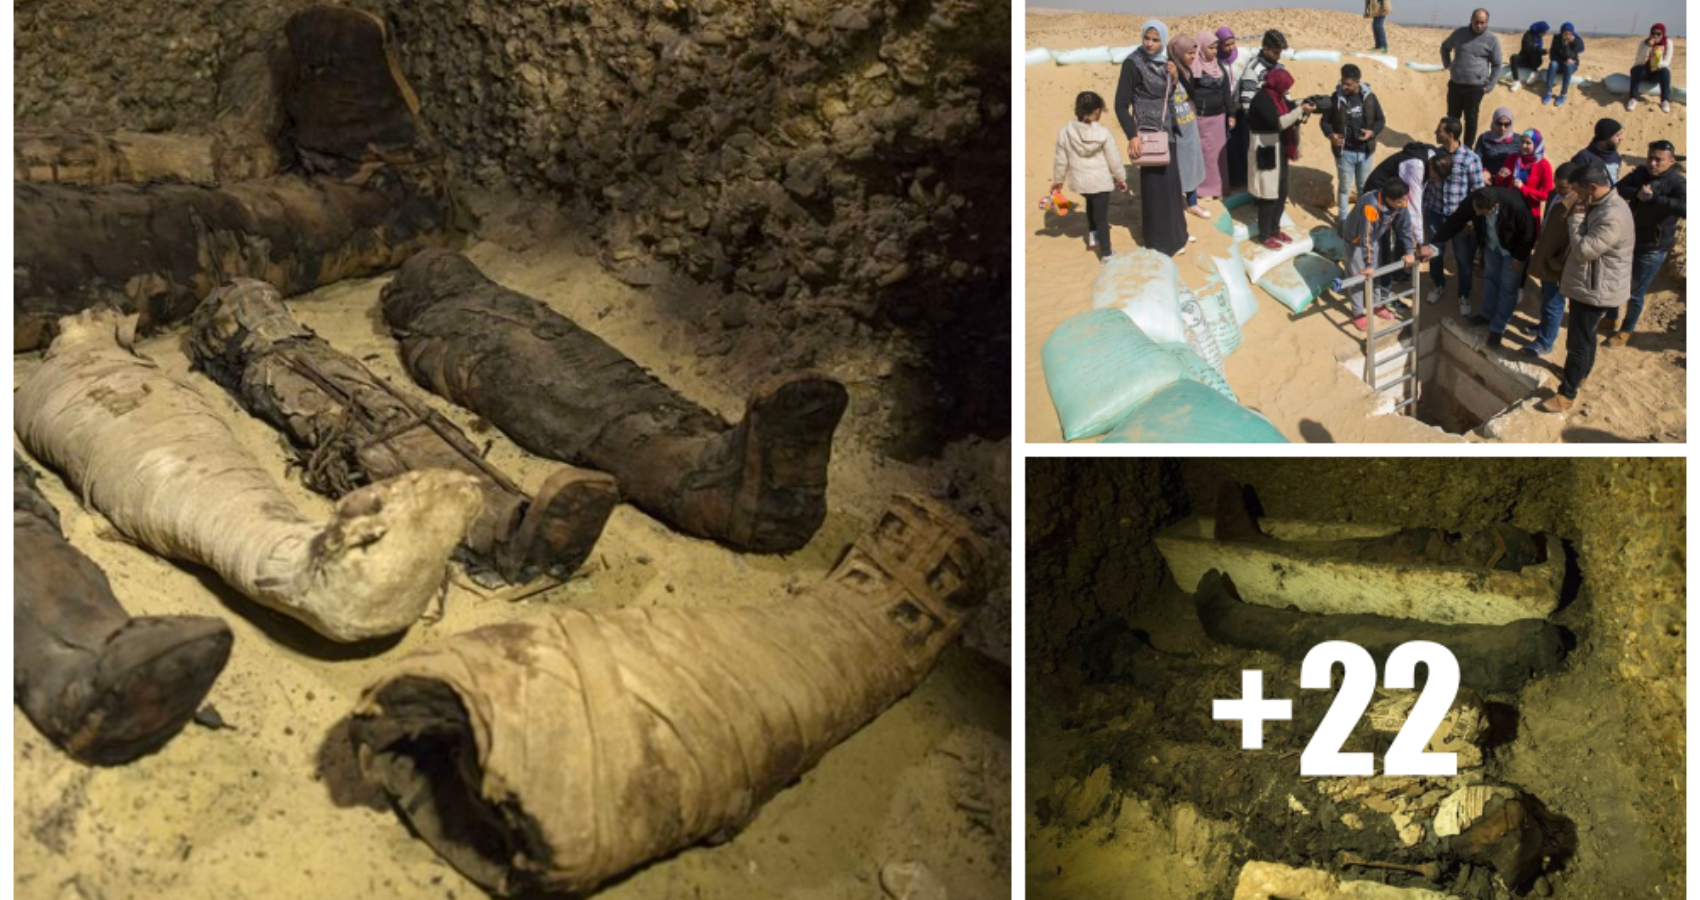 A Labyrinth Of Burial Chambers With Mummies Of Men, Women And Children